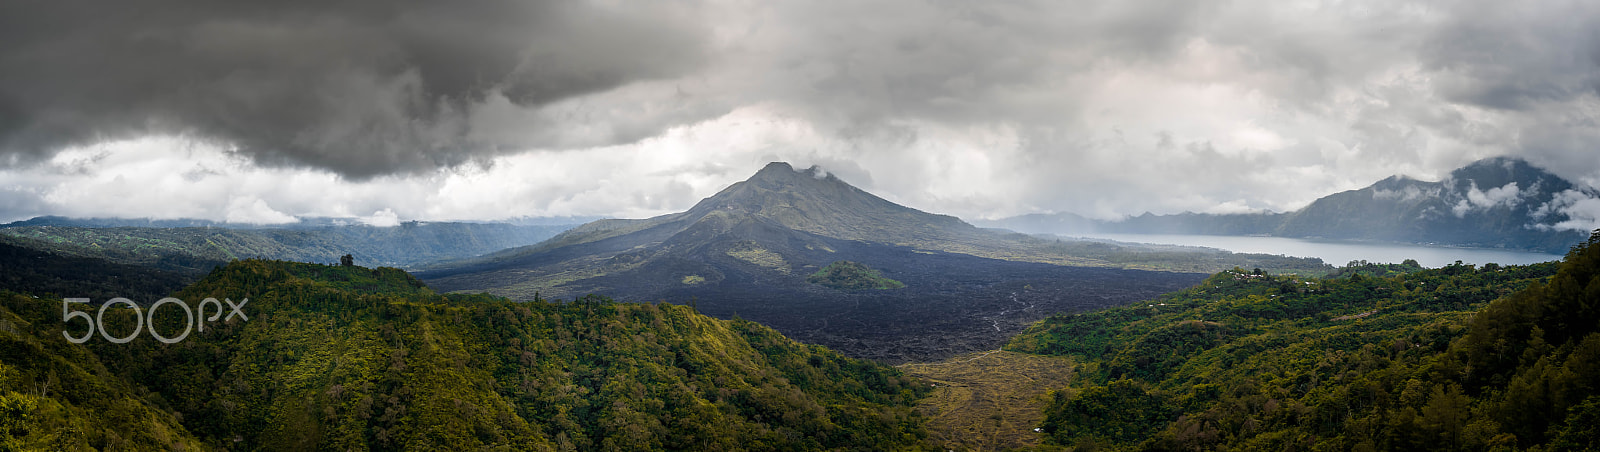 Sony a7 + Canon EF 17-40mm F4L USM sample photo. Mount batur, bali indonesia photography